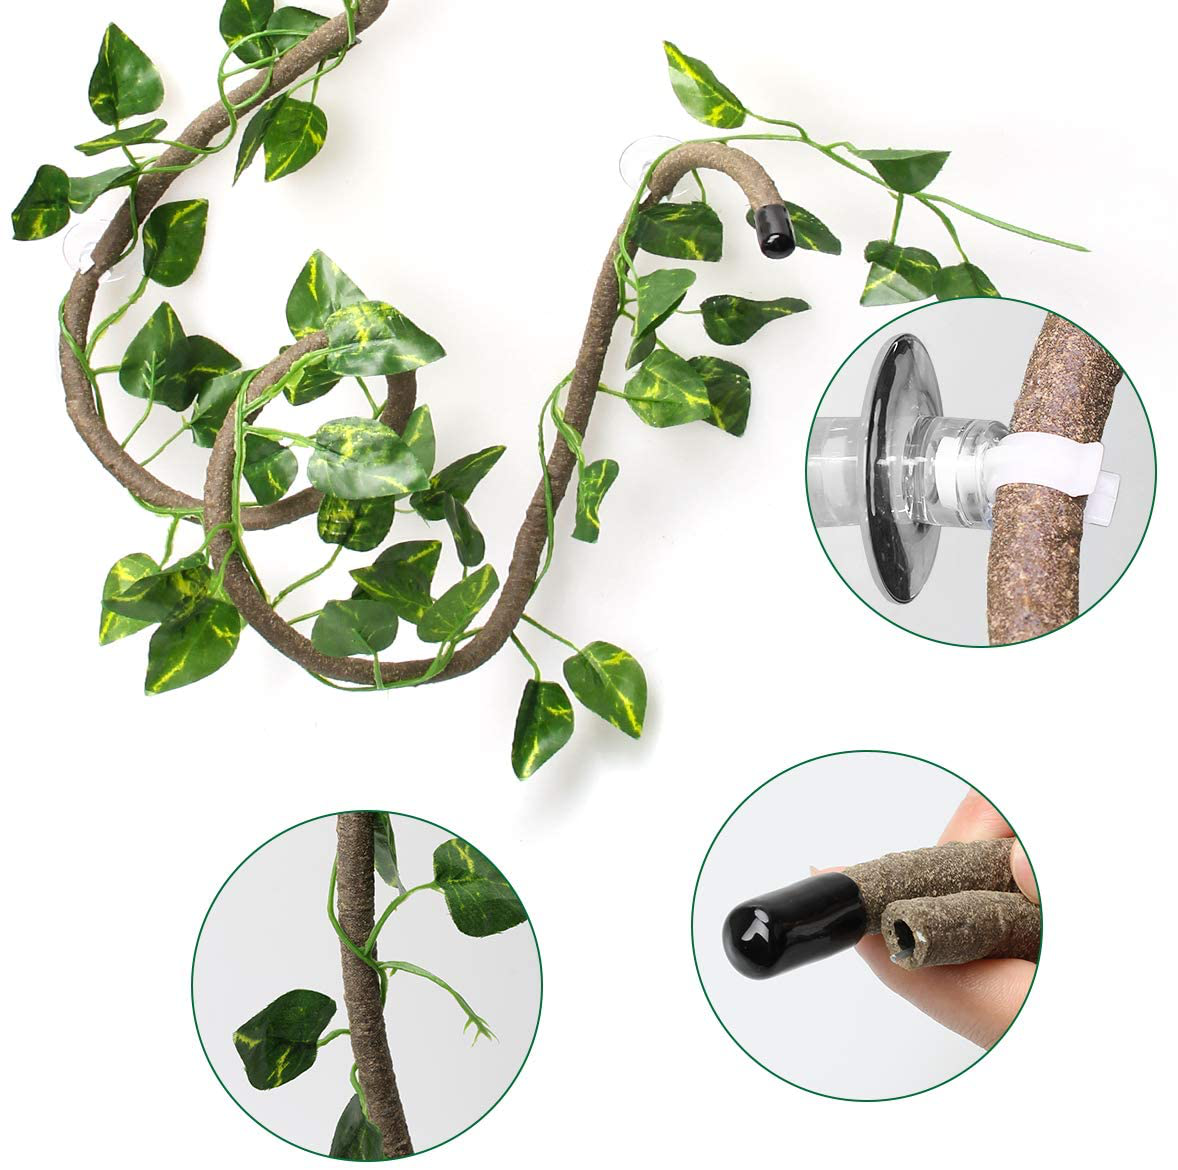 Coolrunner 8FT Reptile Vines and Flexible Reptile Leaves with Suction Cups Jungle Climber Long Vines Habitat Decor for Climbing, Chameleon, Lizards, Gecko Animals & Pet Supplies > Pet Supplies > Reptile & Amphibian Supplies > Reptile & Amphibian Substrates Coolrunner   